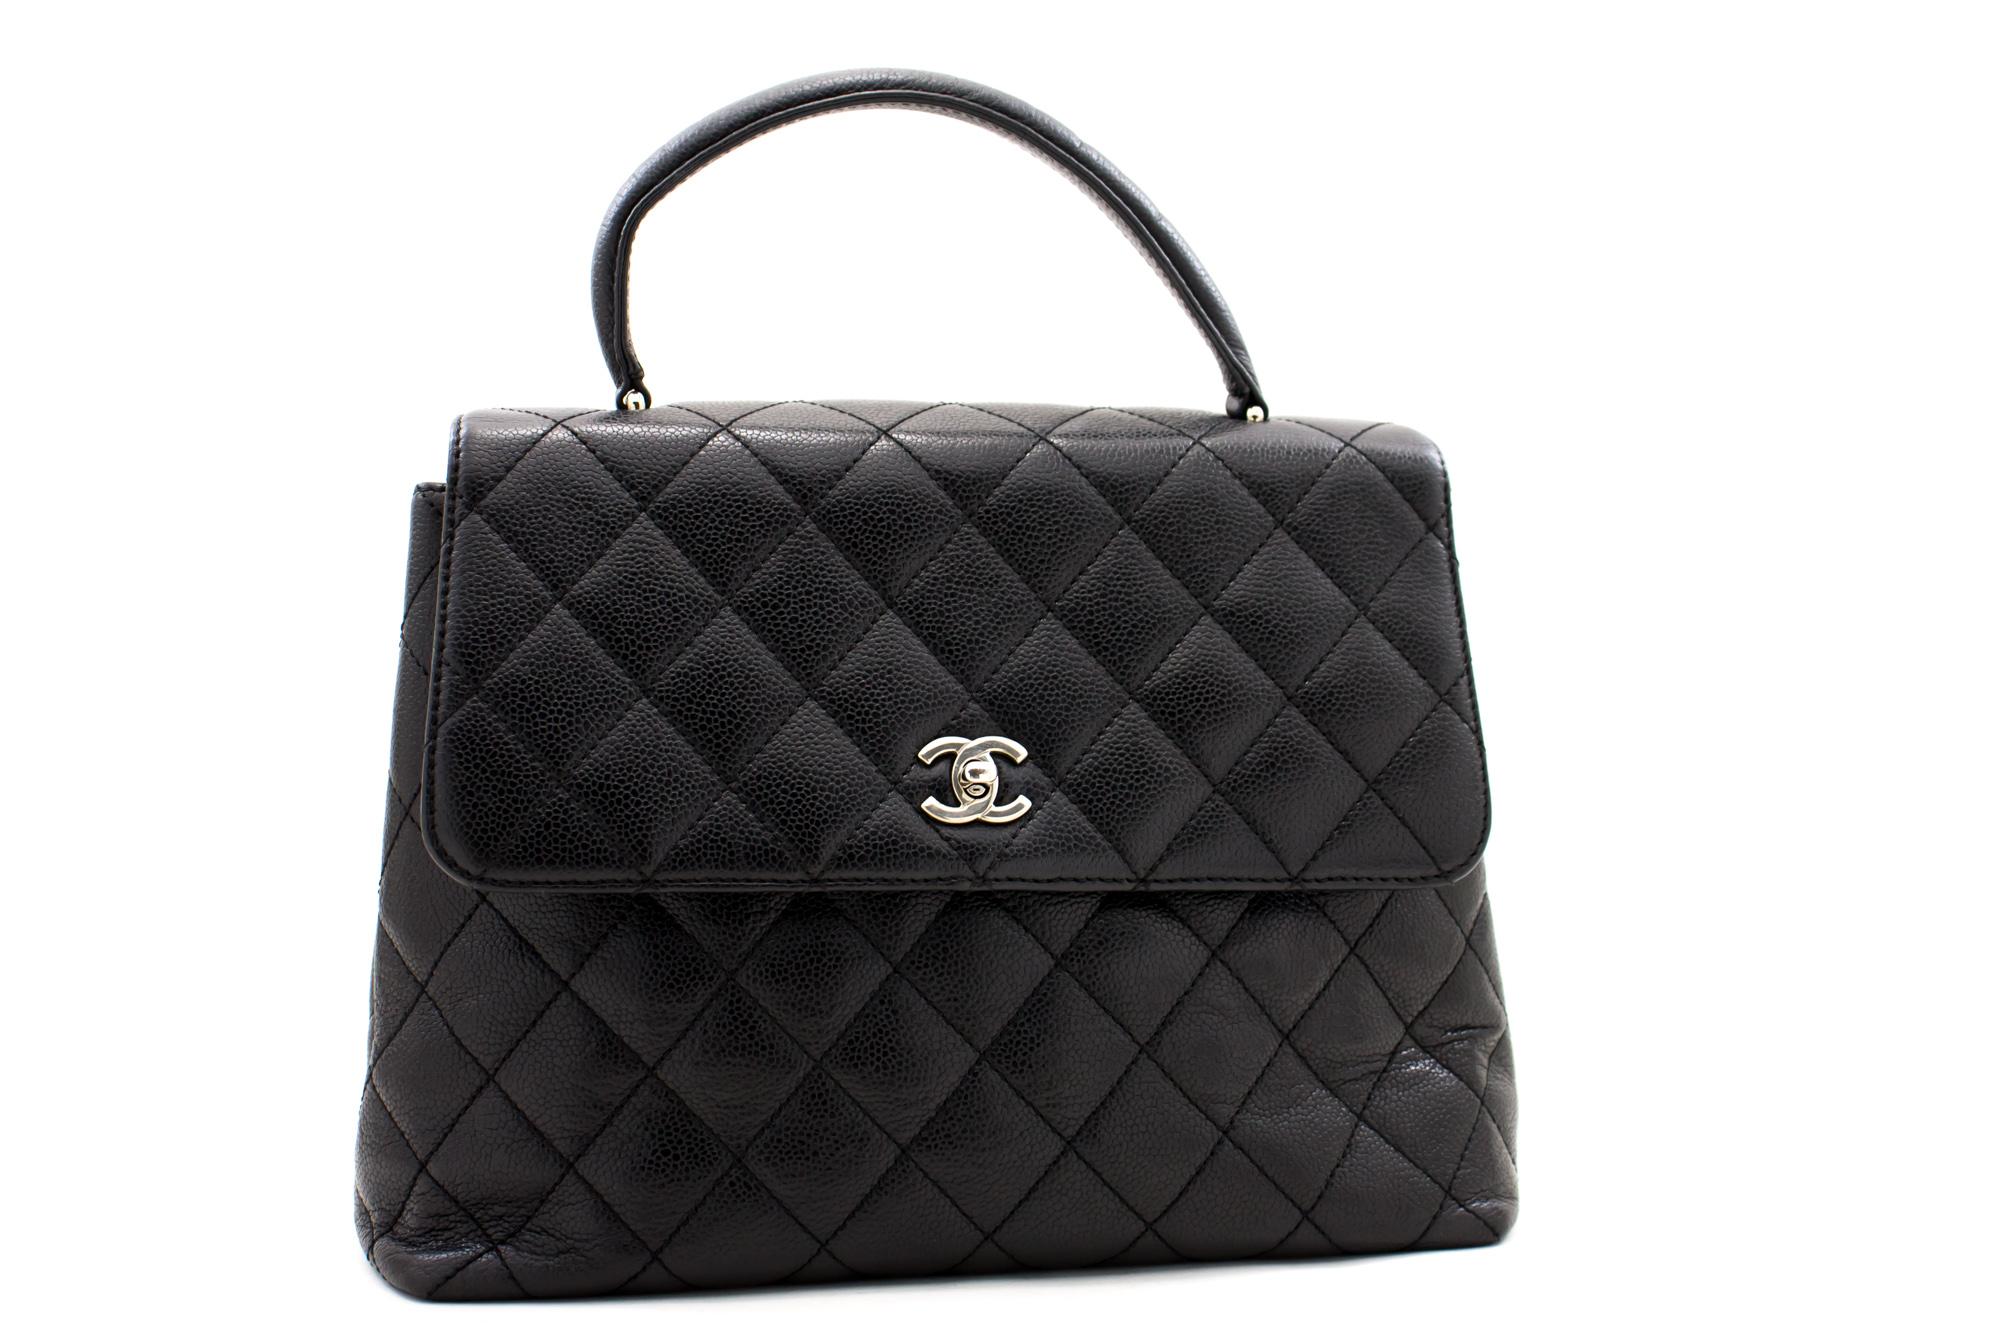 An authentic CHANEL Kelly Caviar Handbag Bag Black Flap Leather Silver Hardware. The color is Black. The outside material is Leather. The pattern is Solid. This item is Contemporary. The year of manufacture would be 2000-2 0 0 2 .
Conditions &